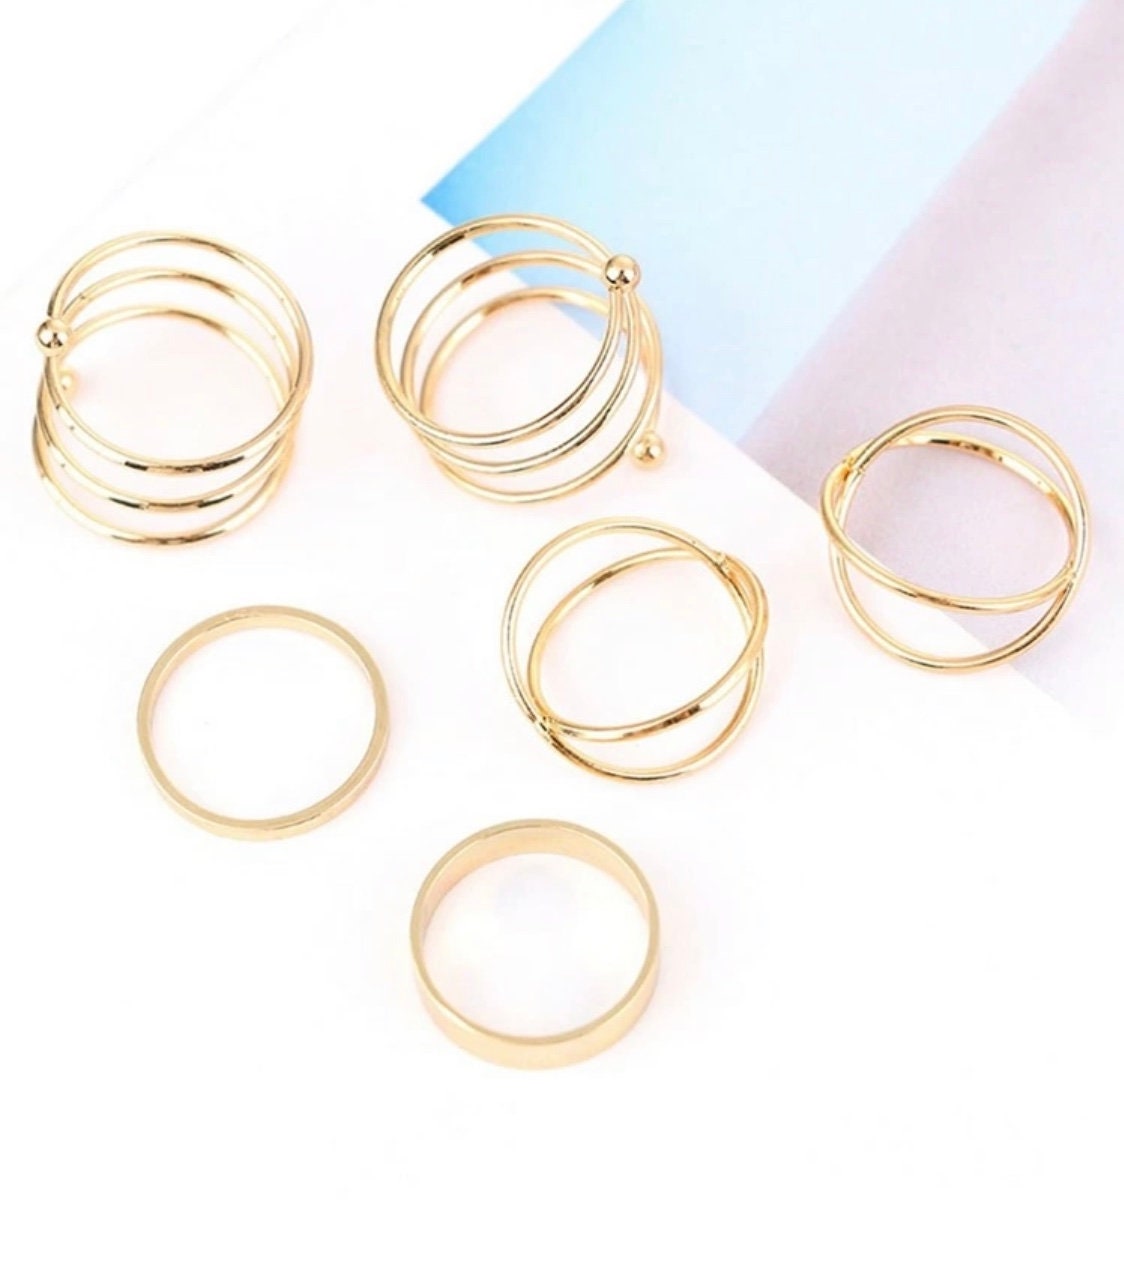 6 Piece Gold Spiral Ring Set, Gold Spiral Rings, Spiral Wrap Rings, Trendy Gold Rings, Gold Minimalist Rings, Gold Eternity Rings